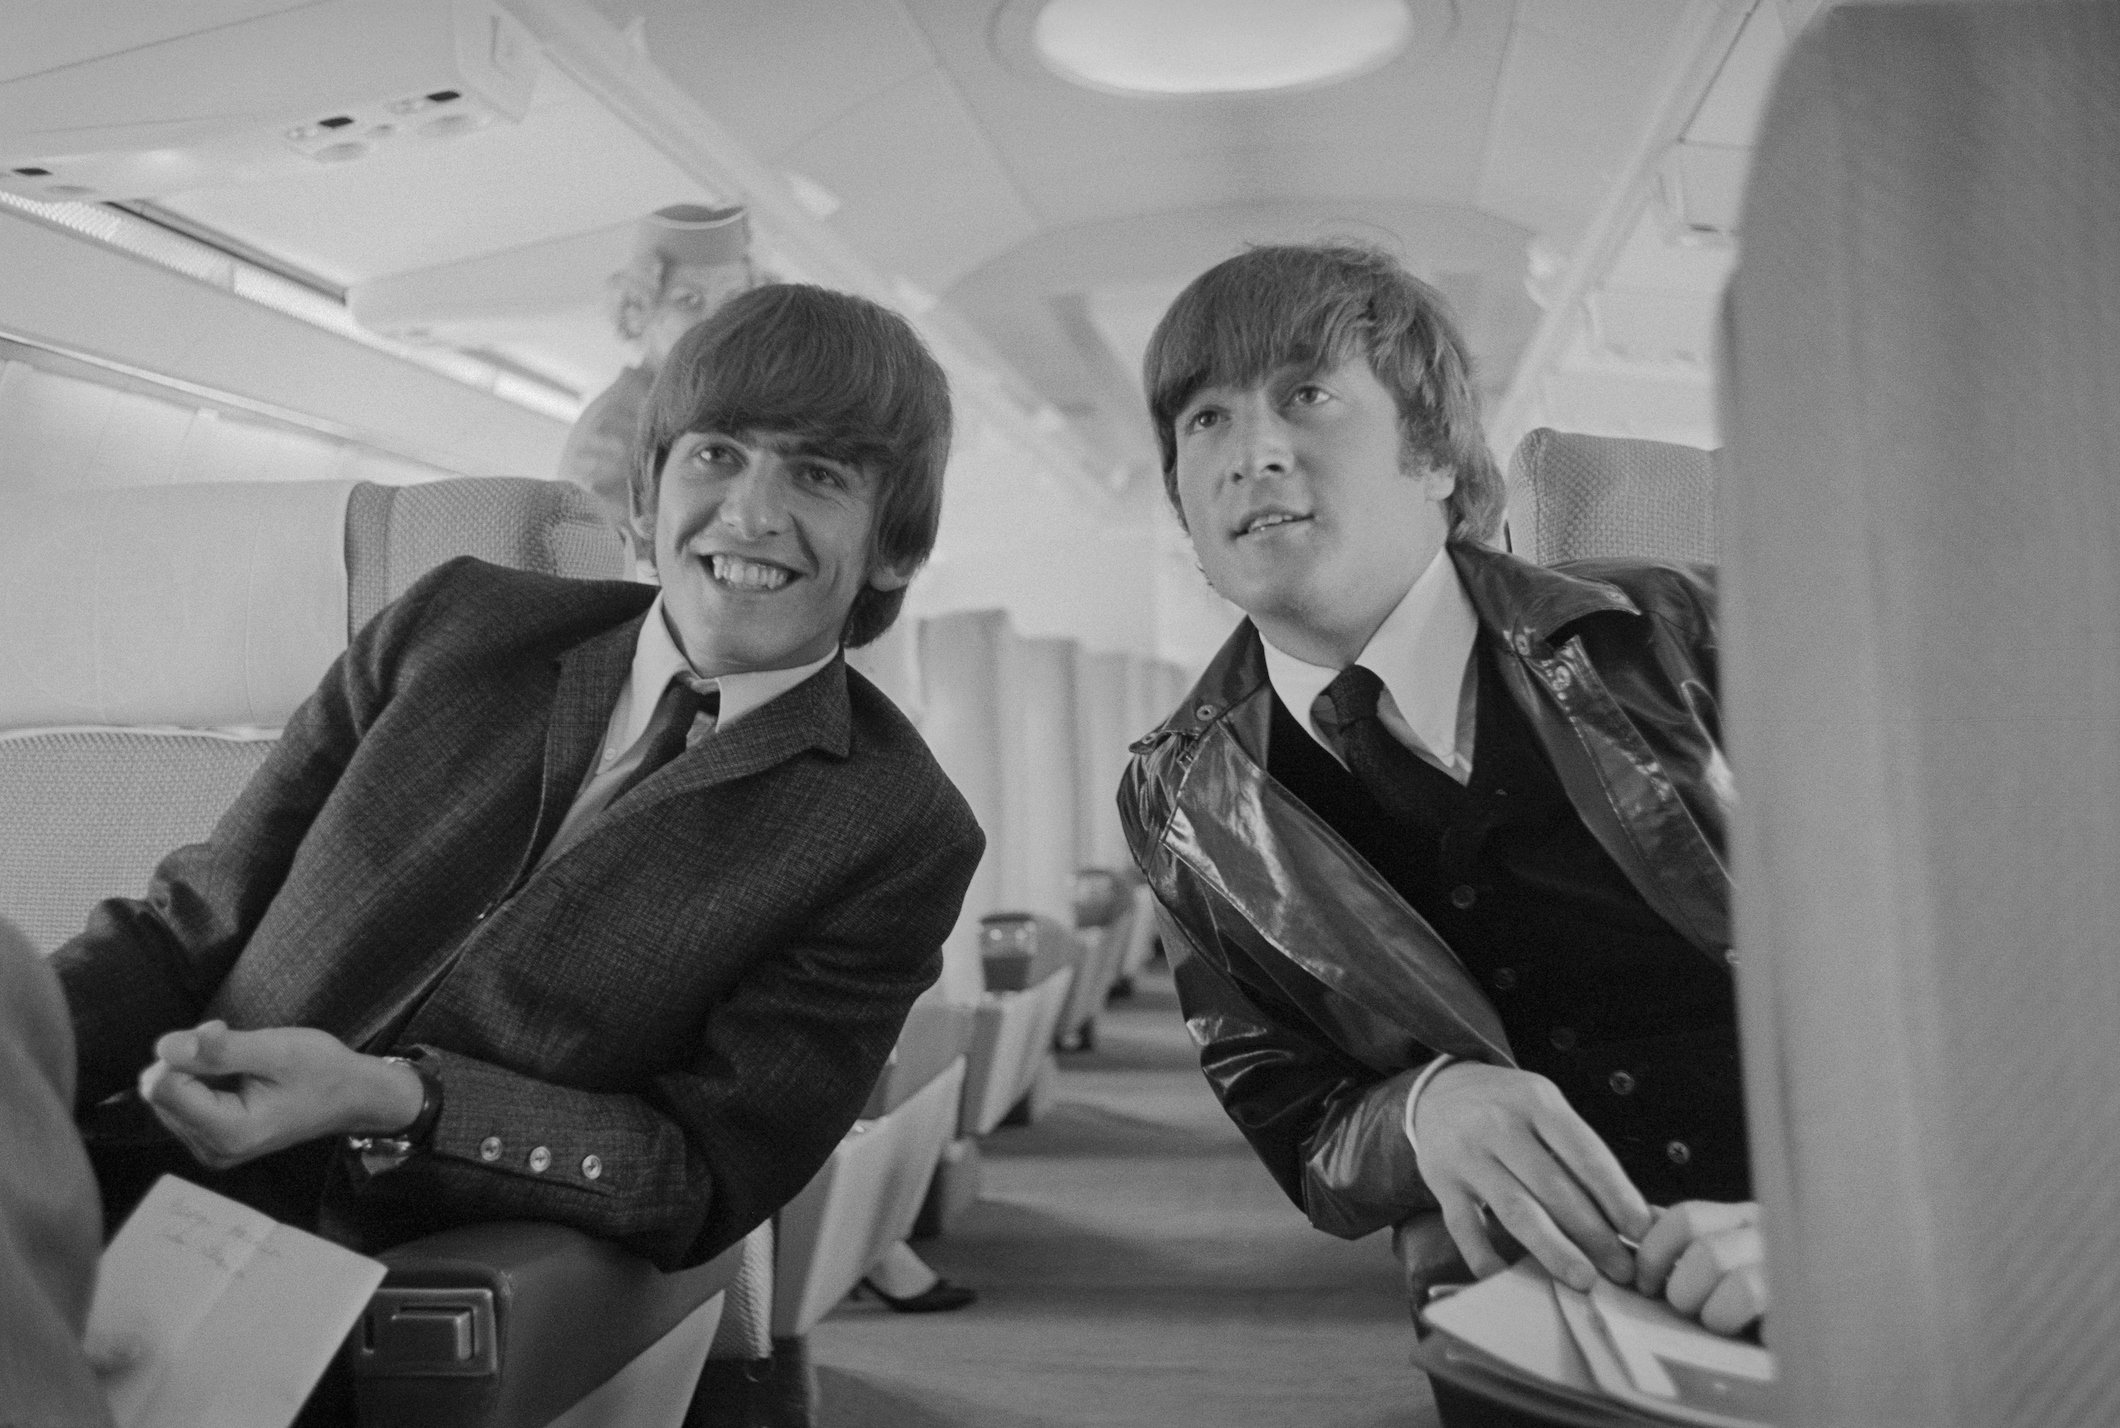 George Harrison and John Lennon of The Beatles smiling aboard their plane